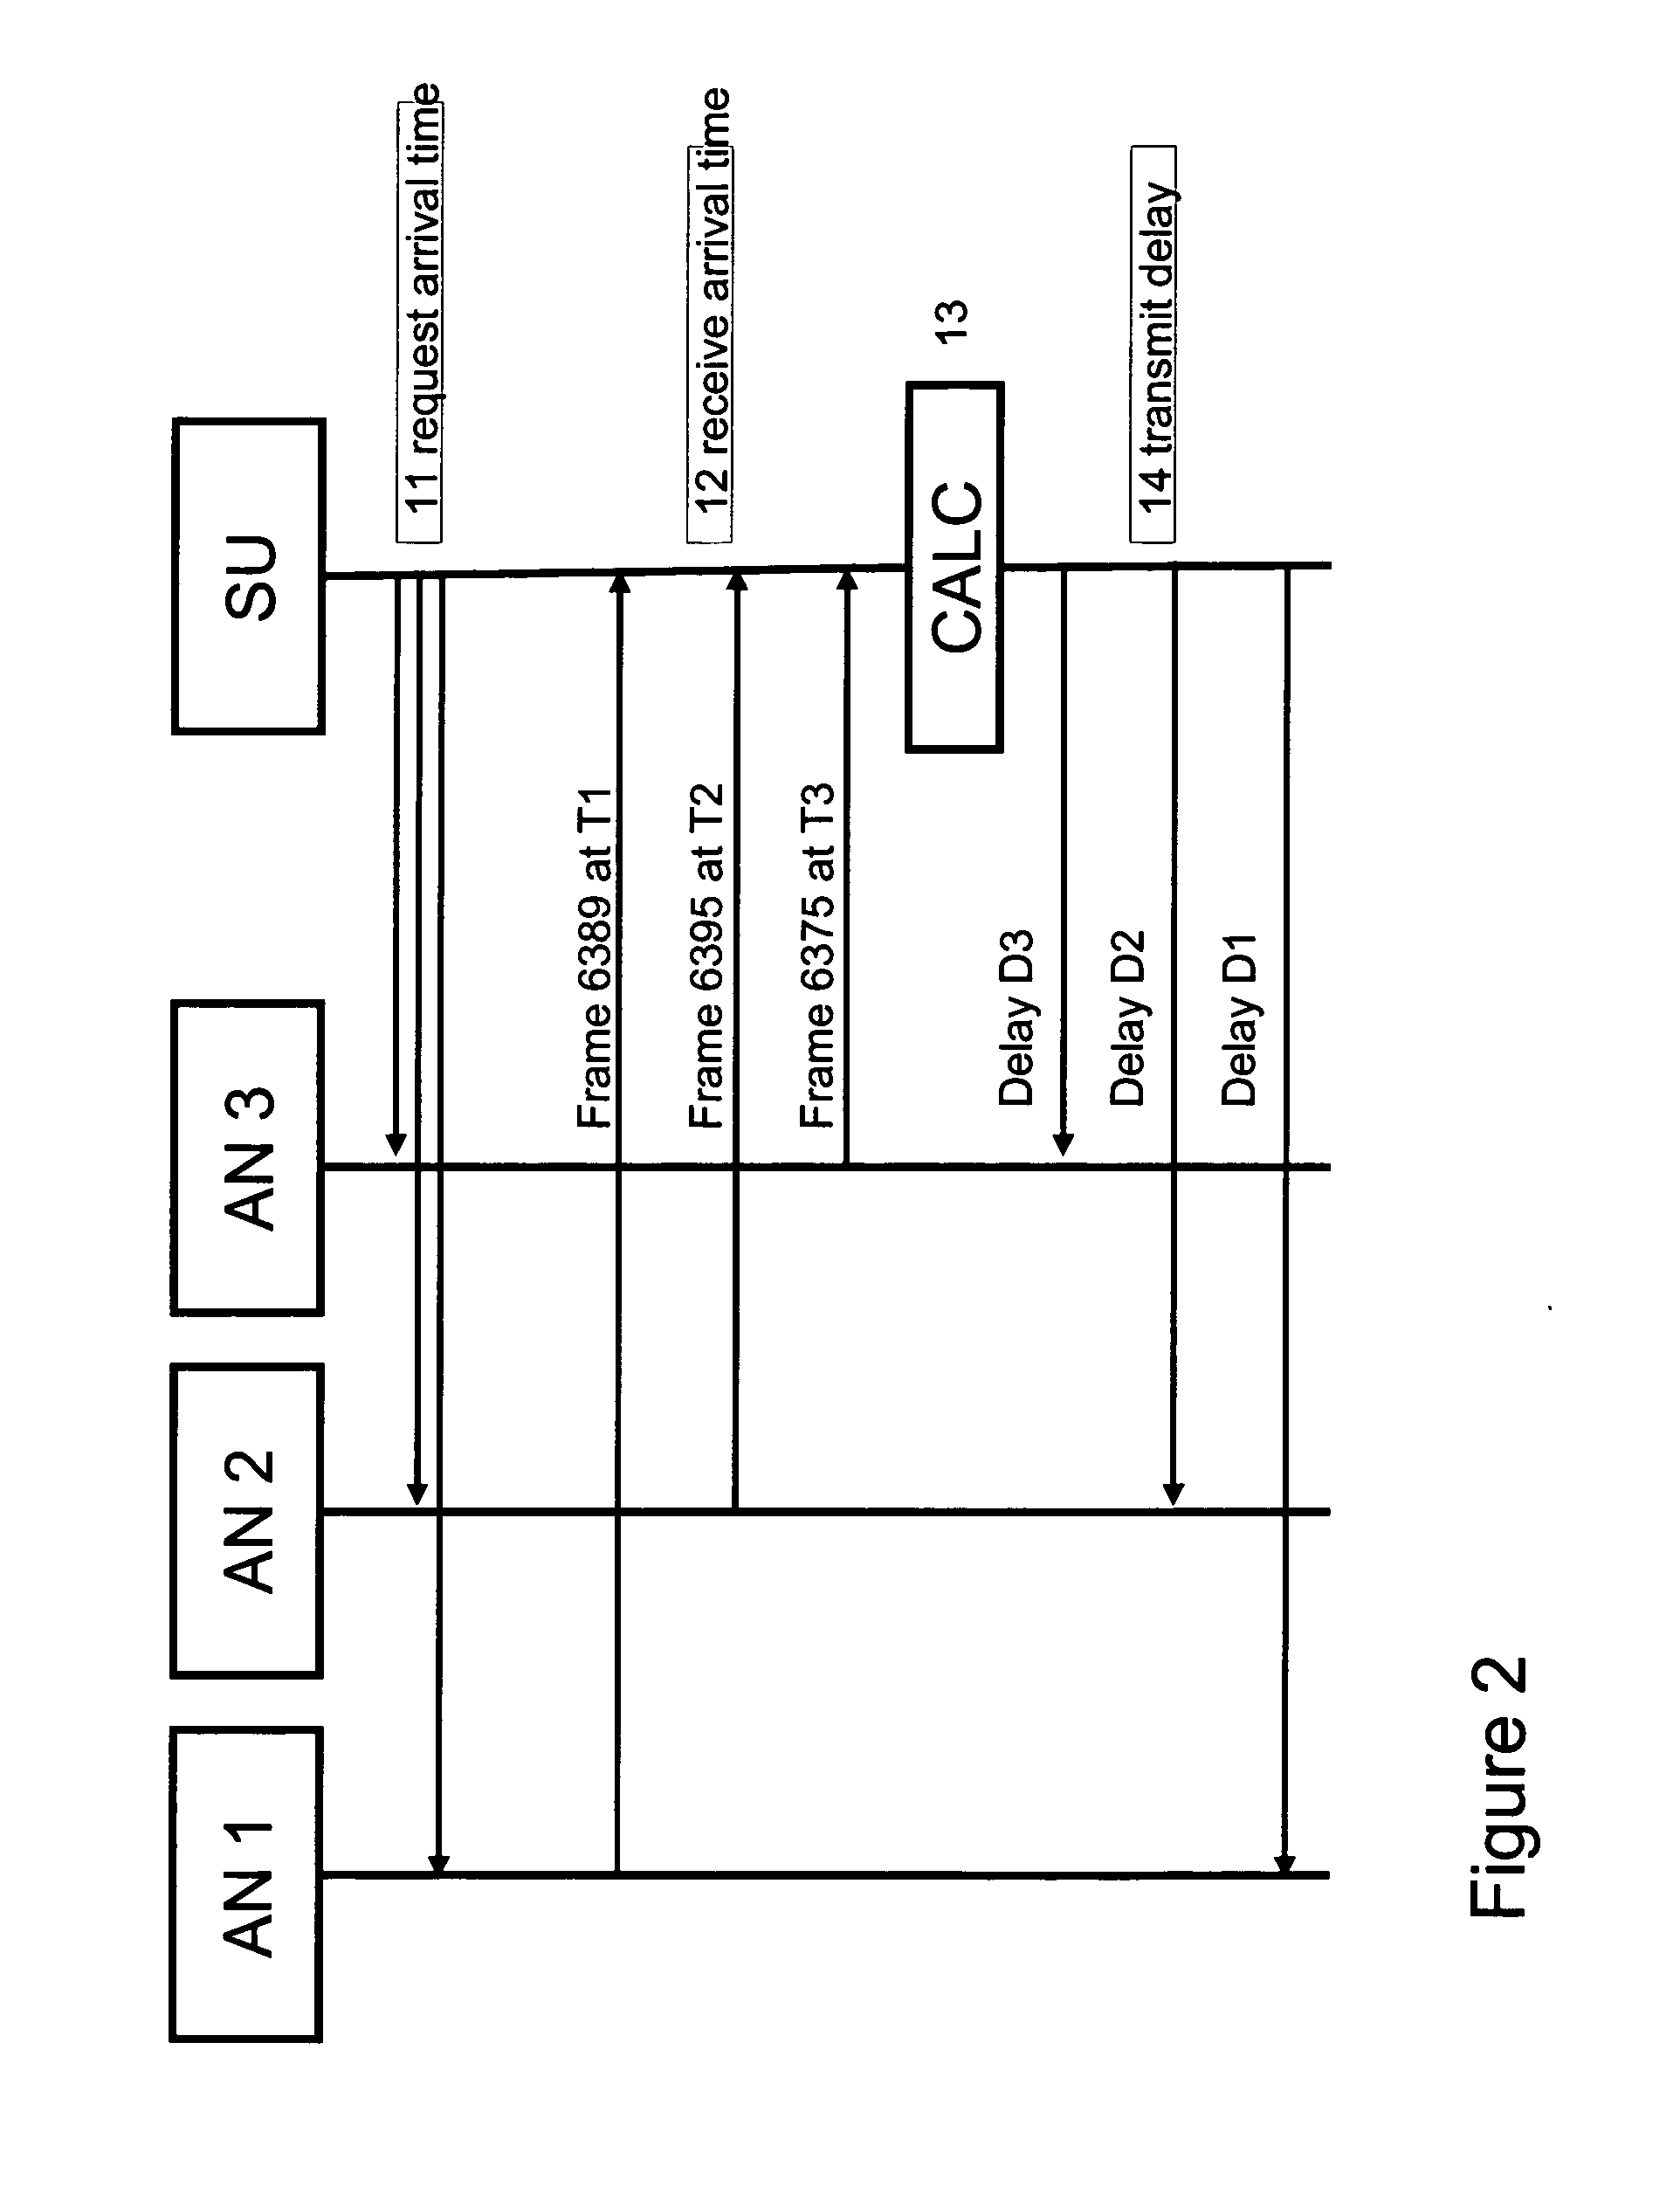 Method and System for Synchronizing a Group of End-Terminals